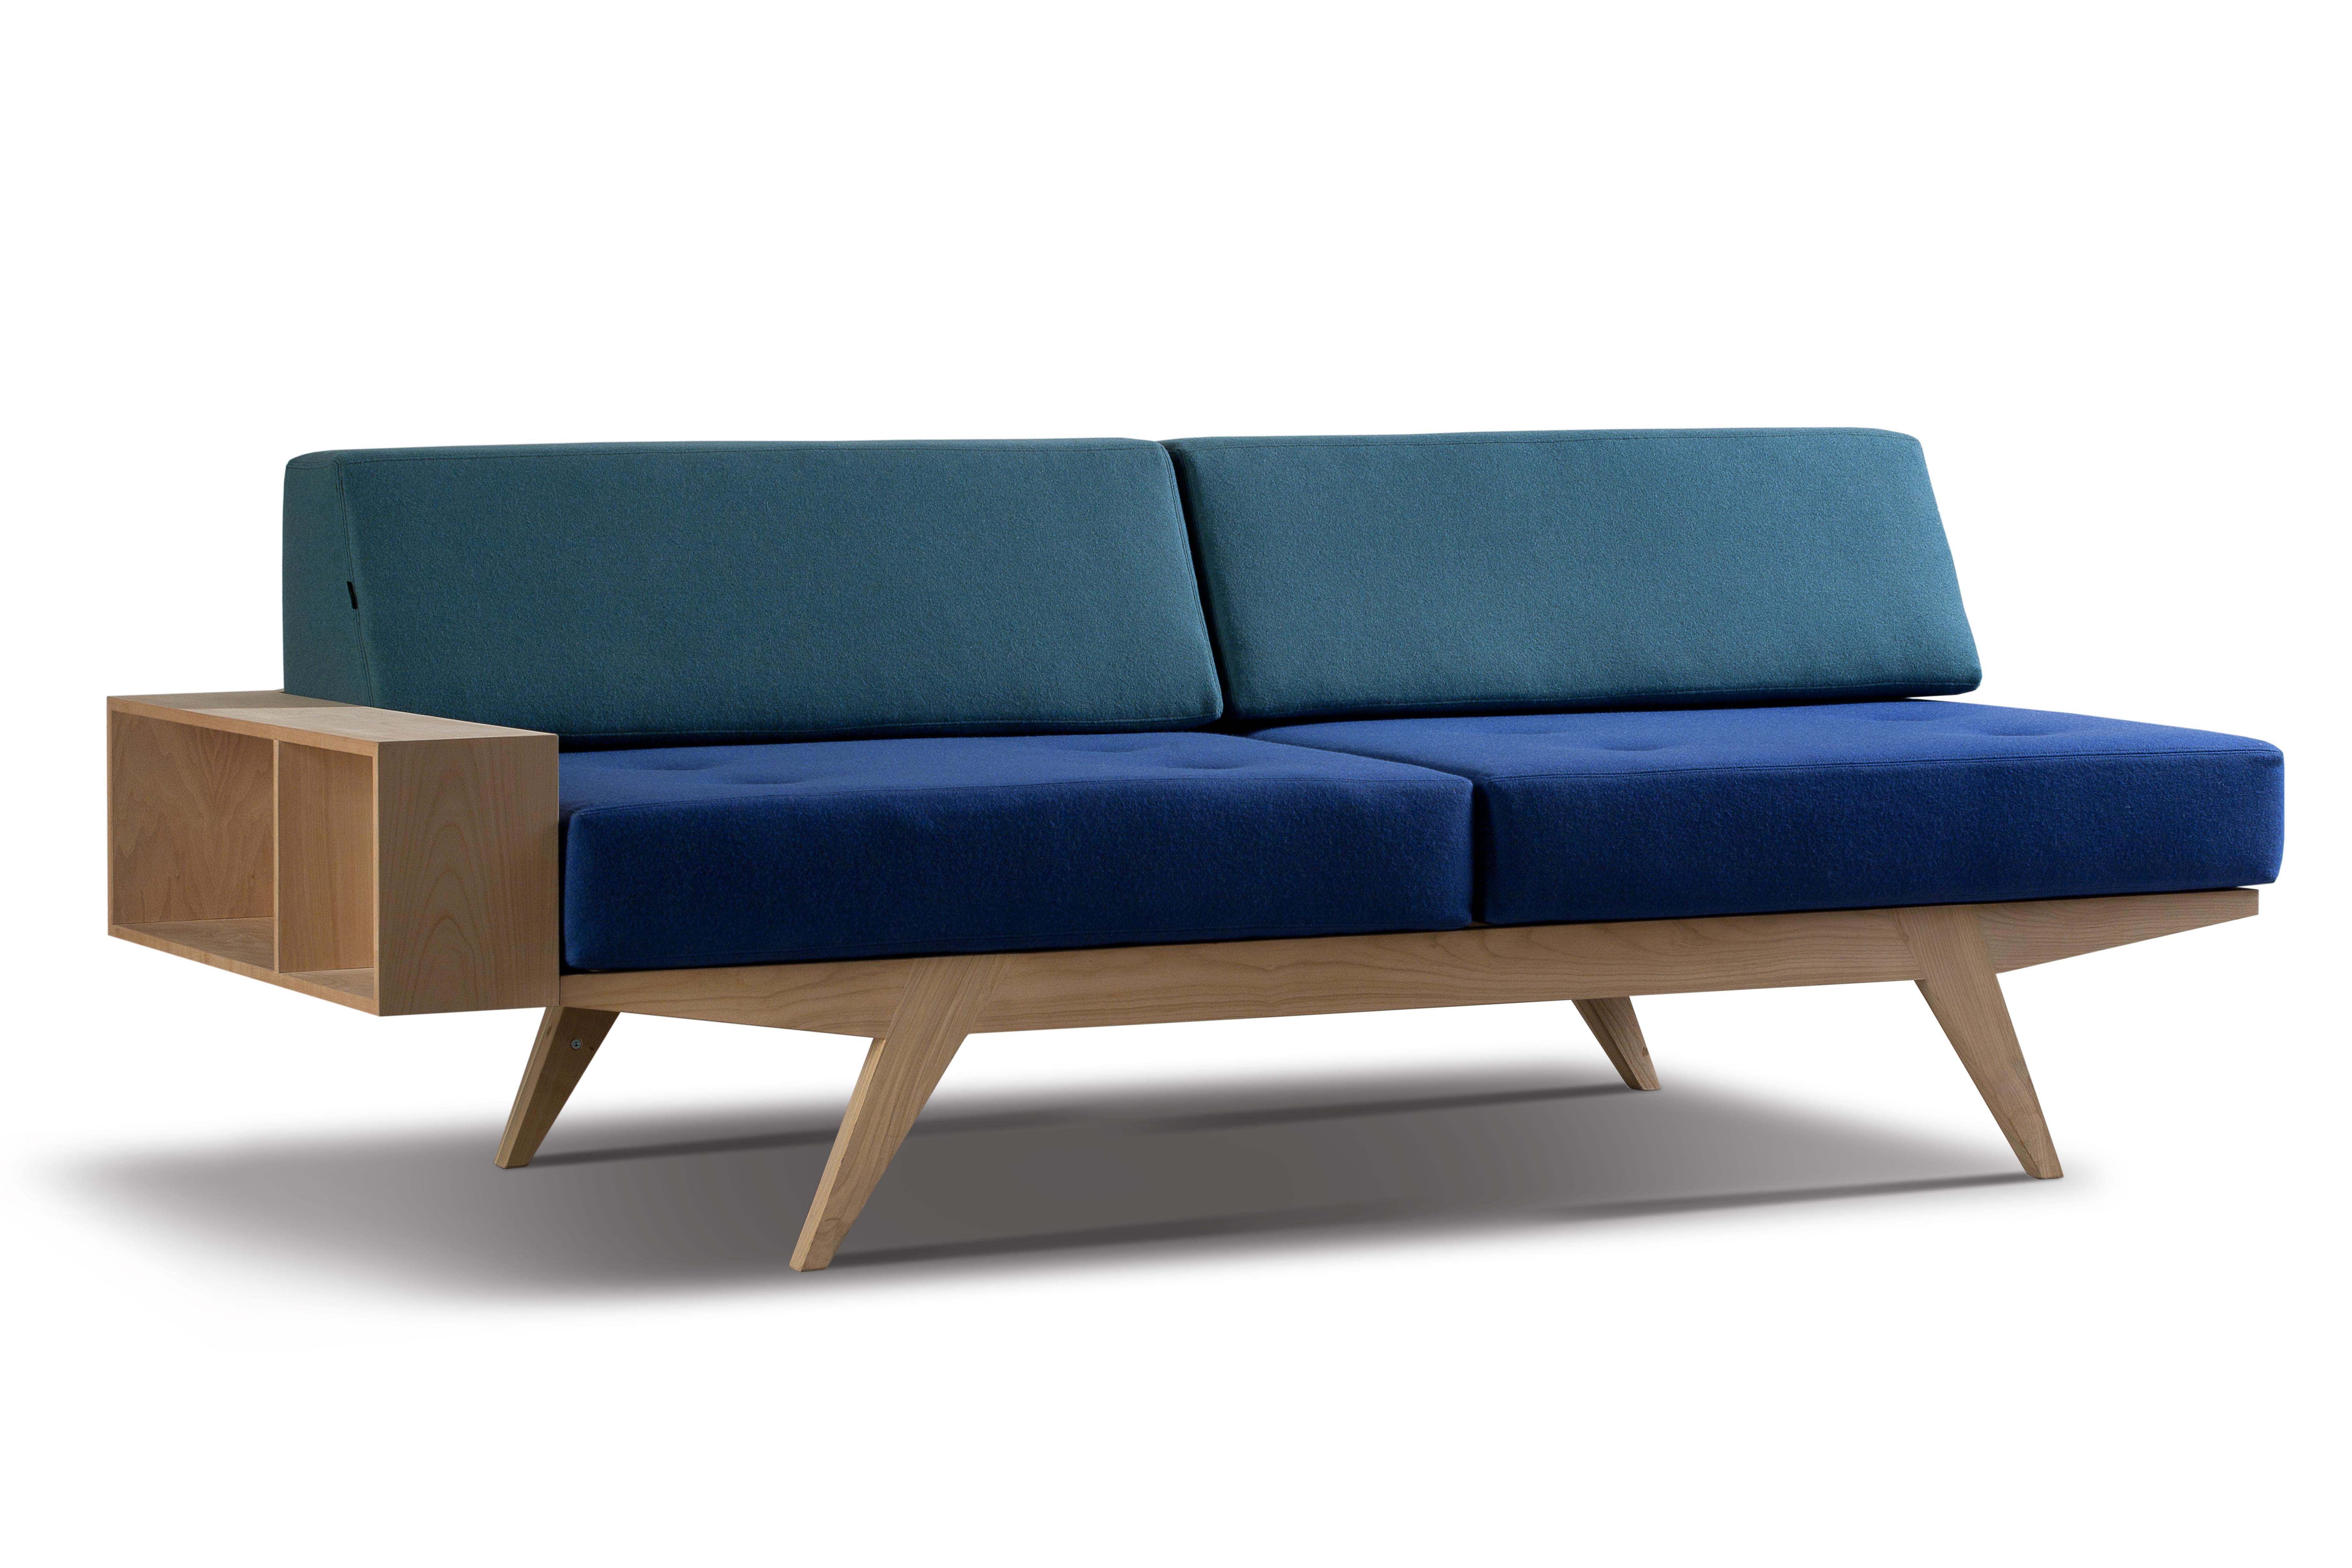 Italian Gio' Contemporary Sofa Bed Made of Solid Cherrywood For Sale